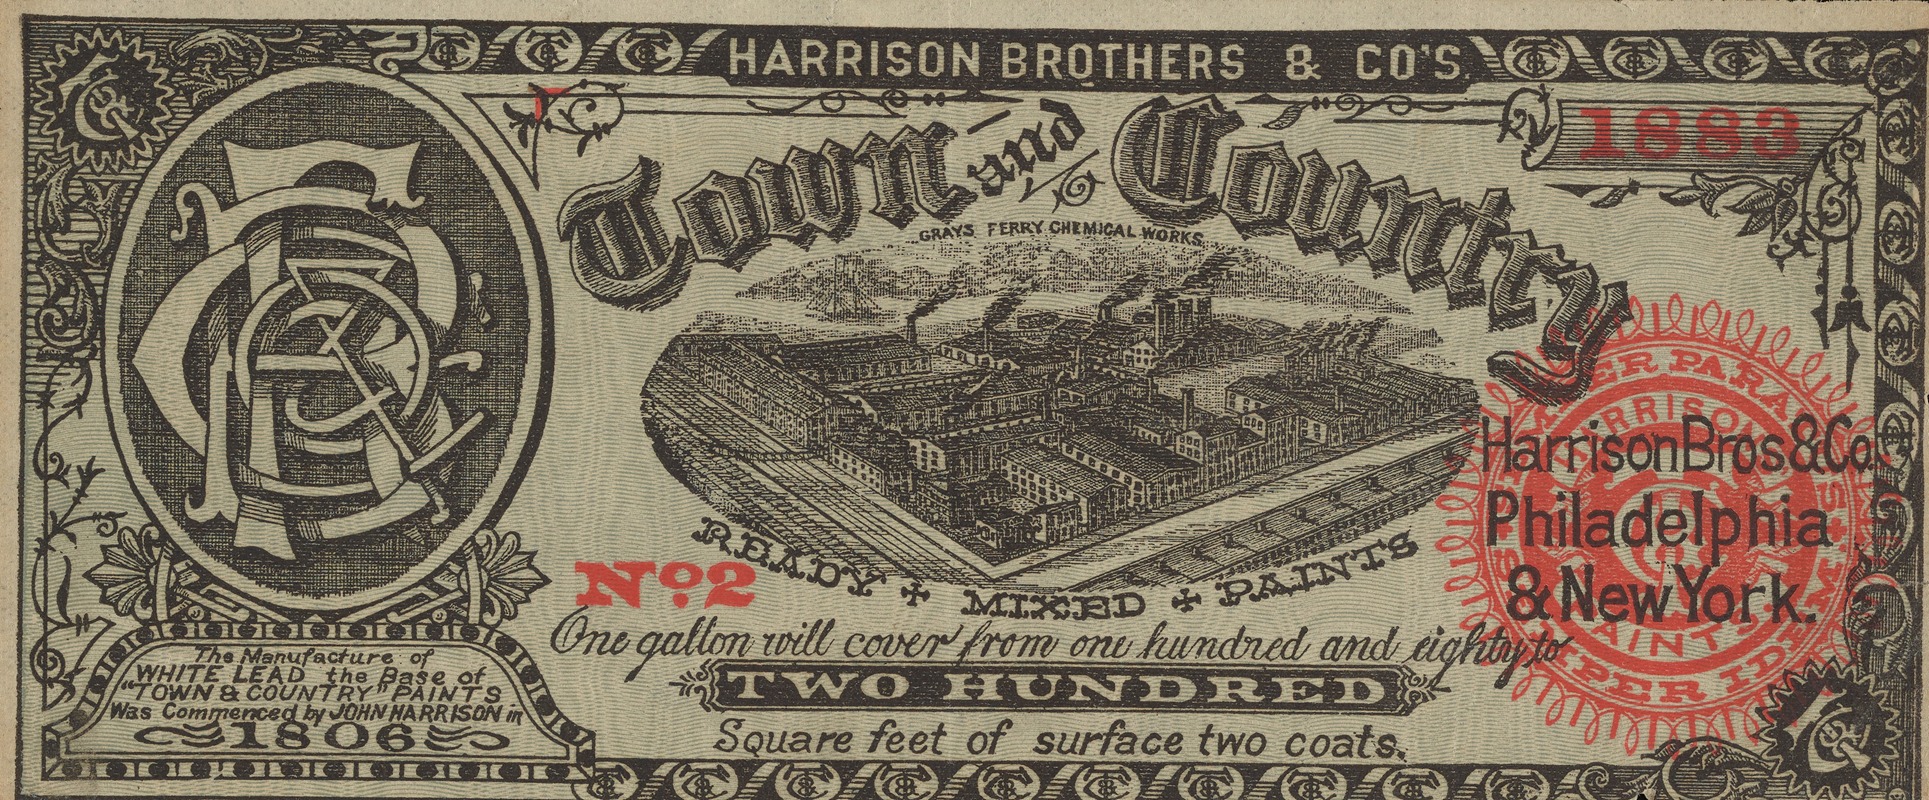 Harrison Bros. & Co. - Town and Country Ready Mixed Paints advertising note